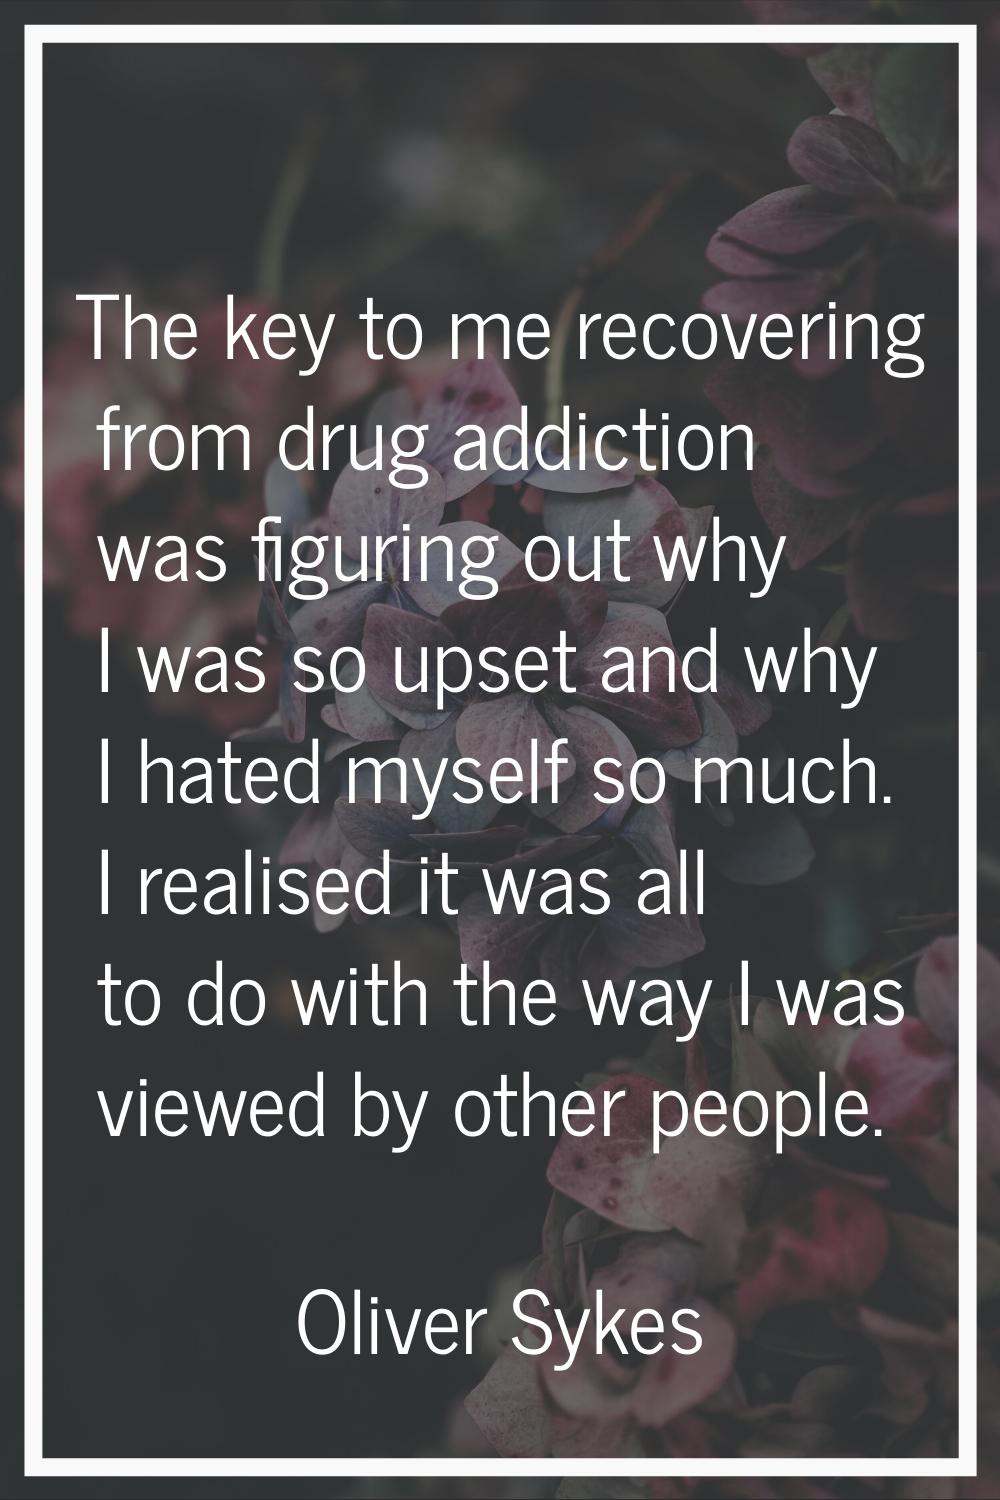 The key to me recovering from drug addiction was figuring out why I was so upset and why I hated my